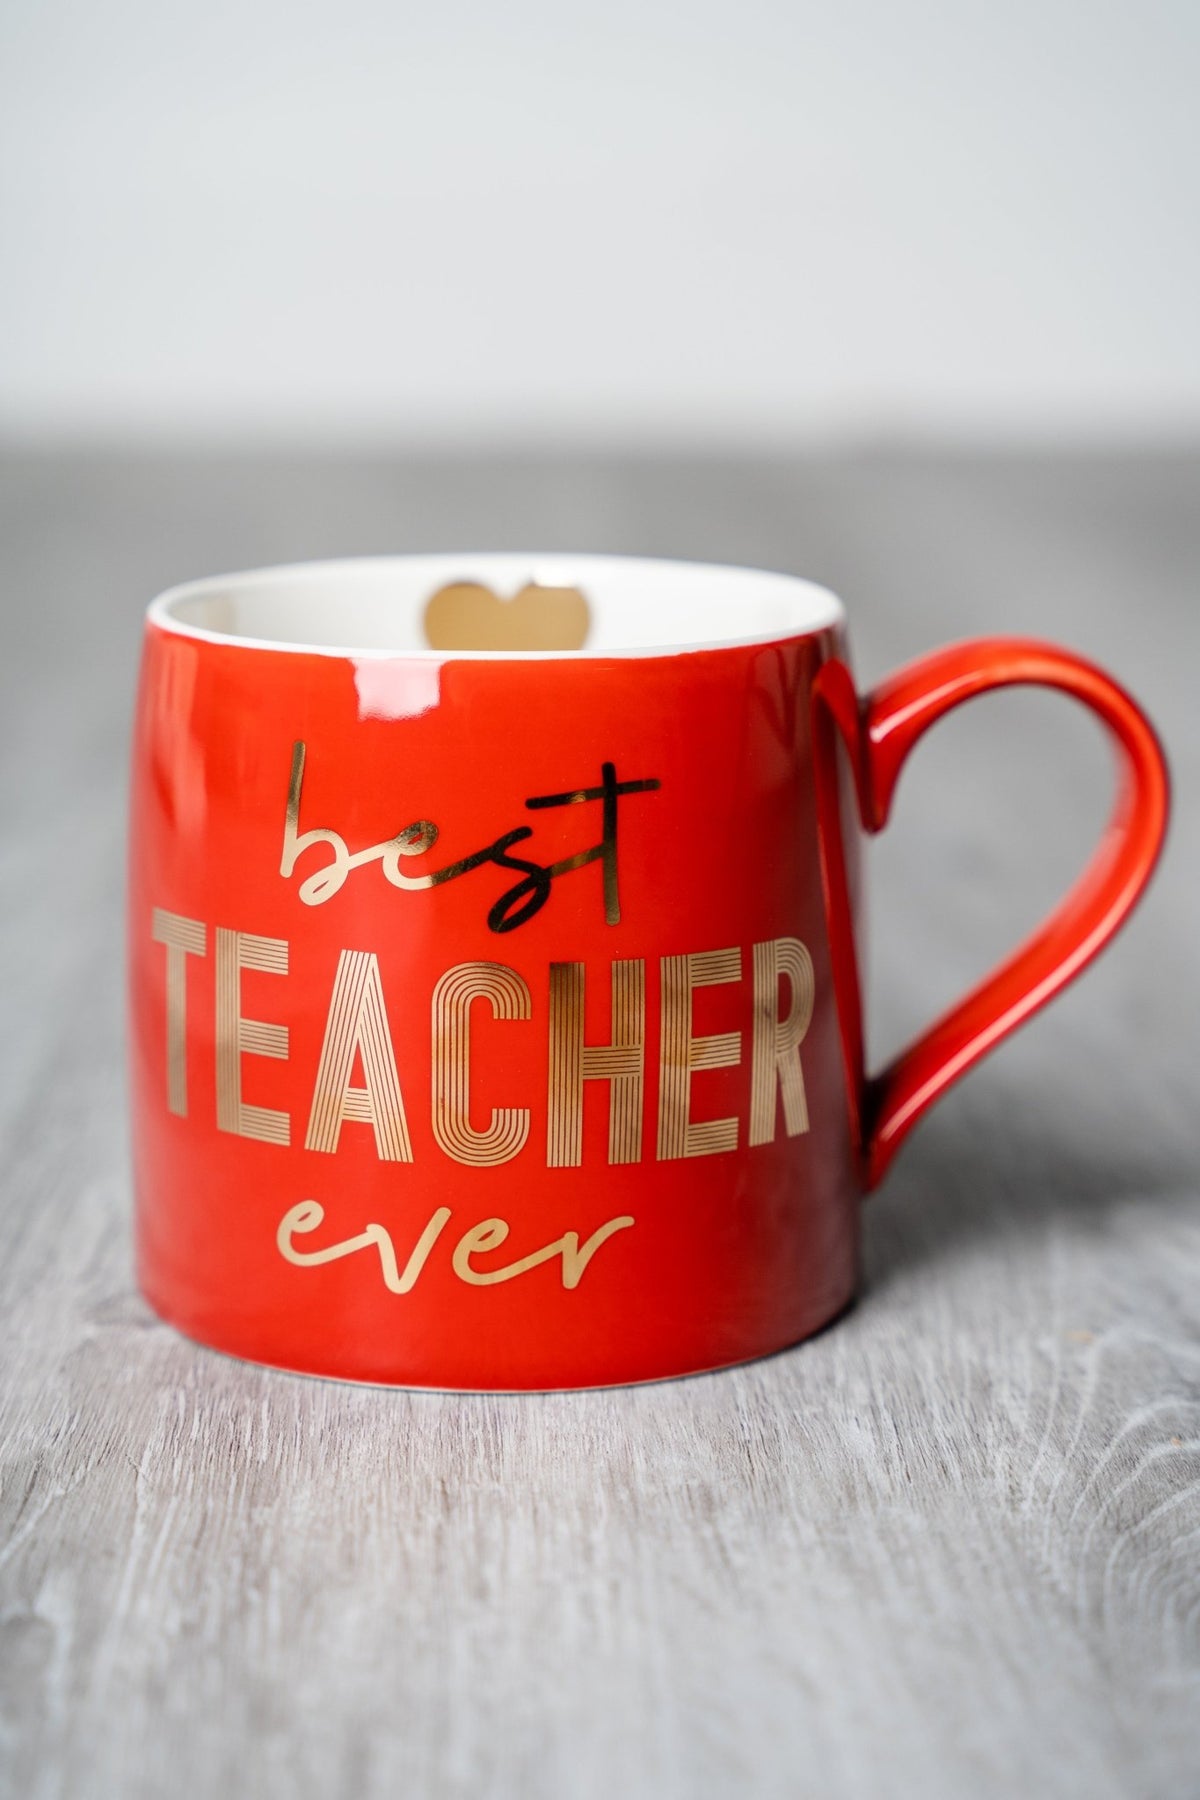 Best teacher ever jumbo coffee mug - Trendy Tumblers, Mugs and Cups at Lush Fashion Lounge Boutique in Oklahoma City